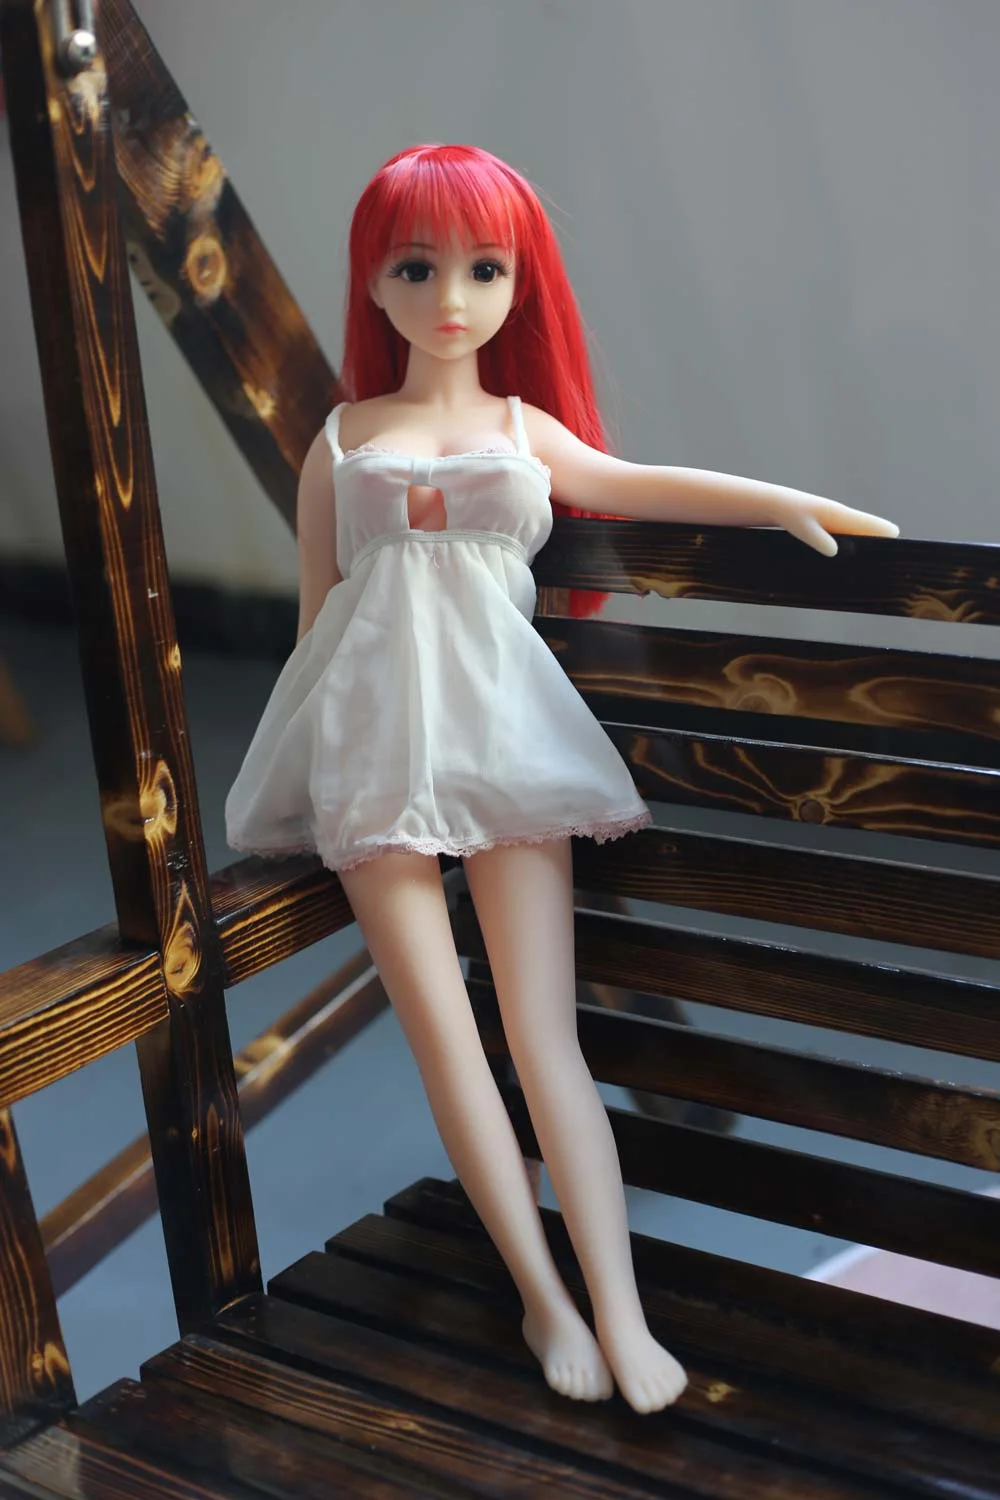 Mini sex doll with red long hair standing on a chair